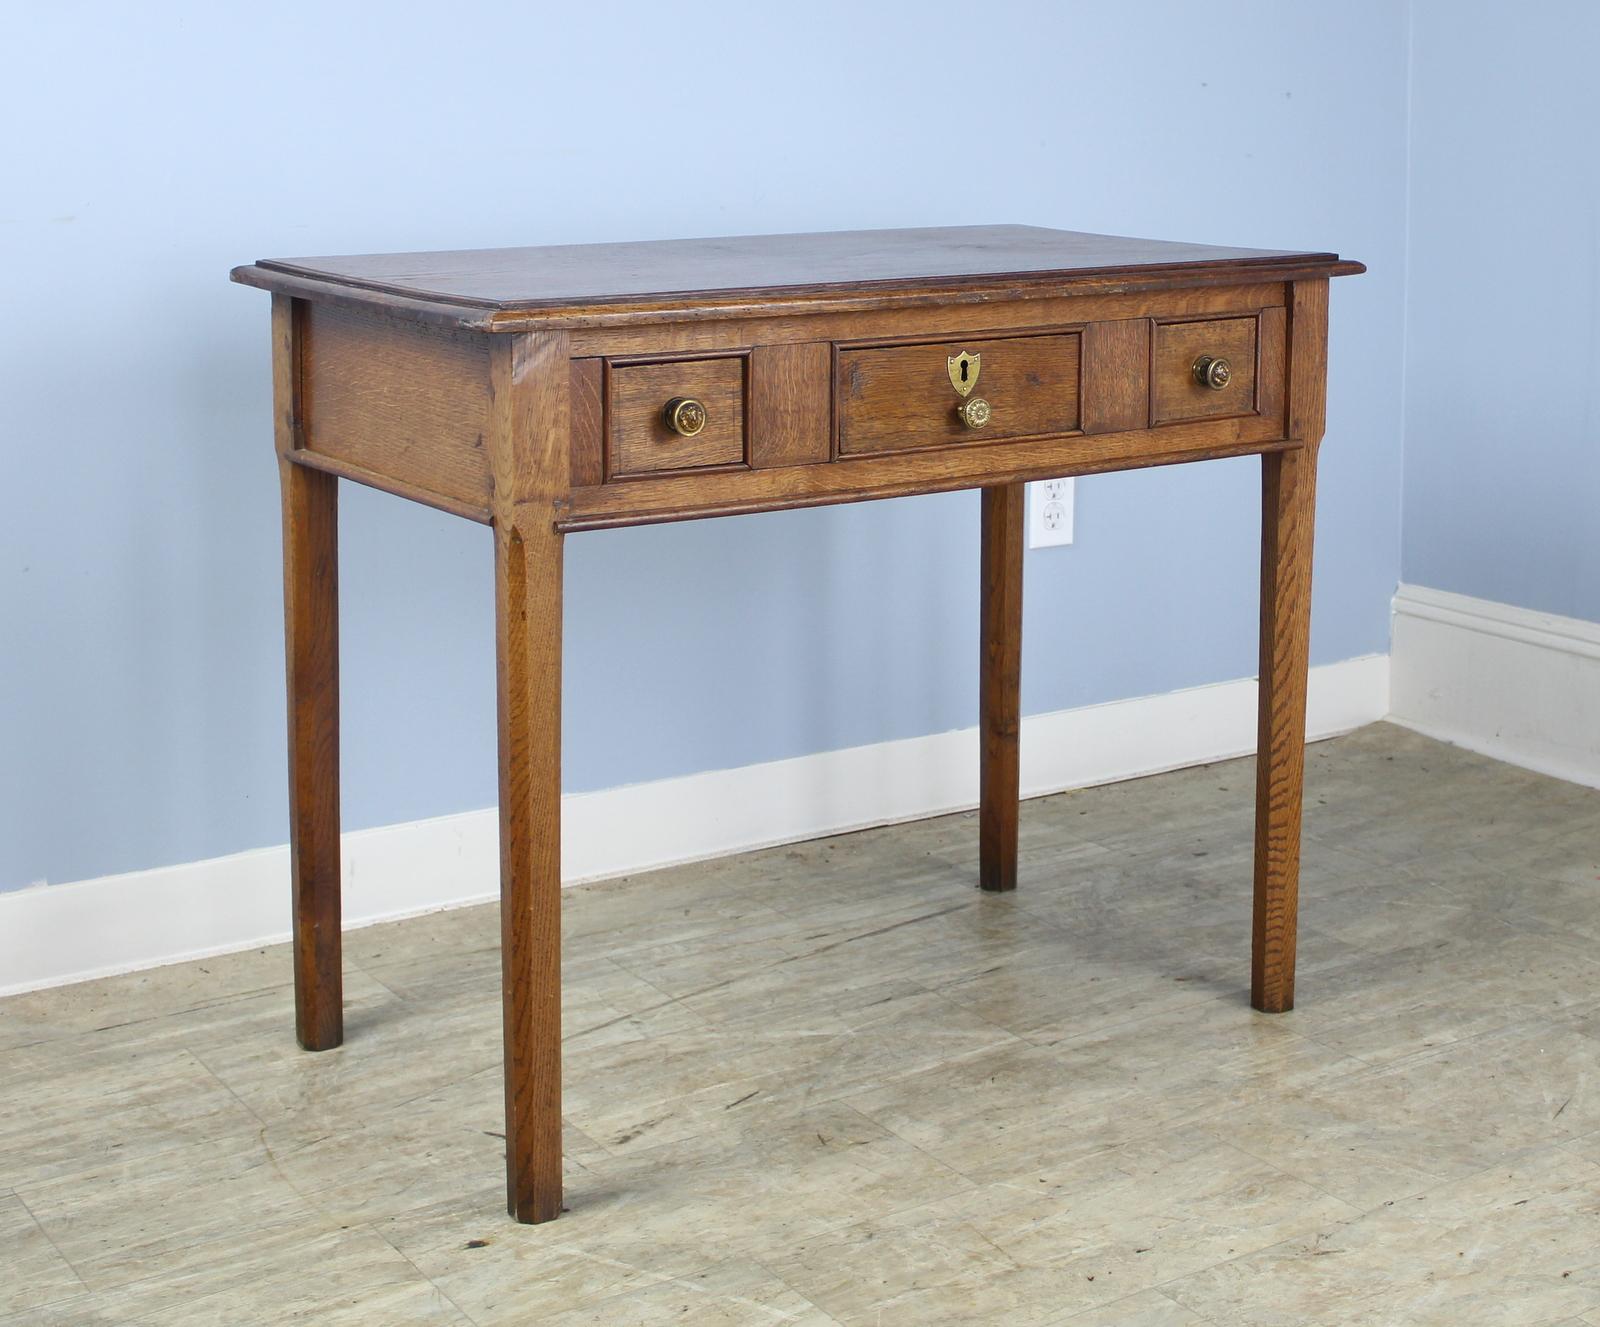 An eye catching side table in English golden oak. The three roomy drawers are accented with original cockbeading. The top is substantial and rounded at the sides for additional style. Good grain and patina.